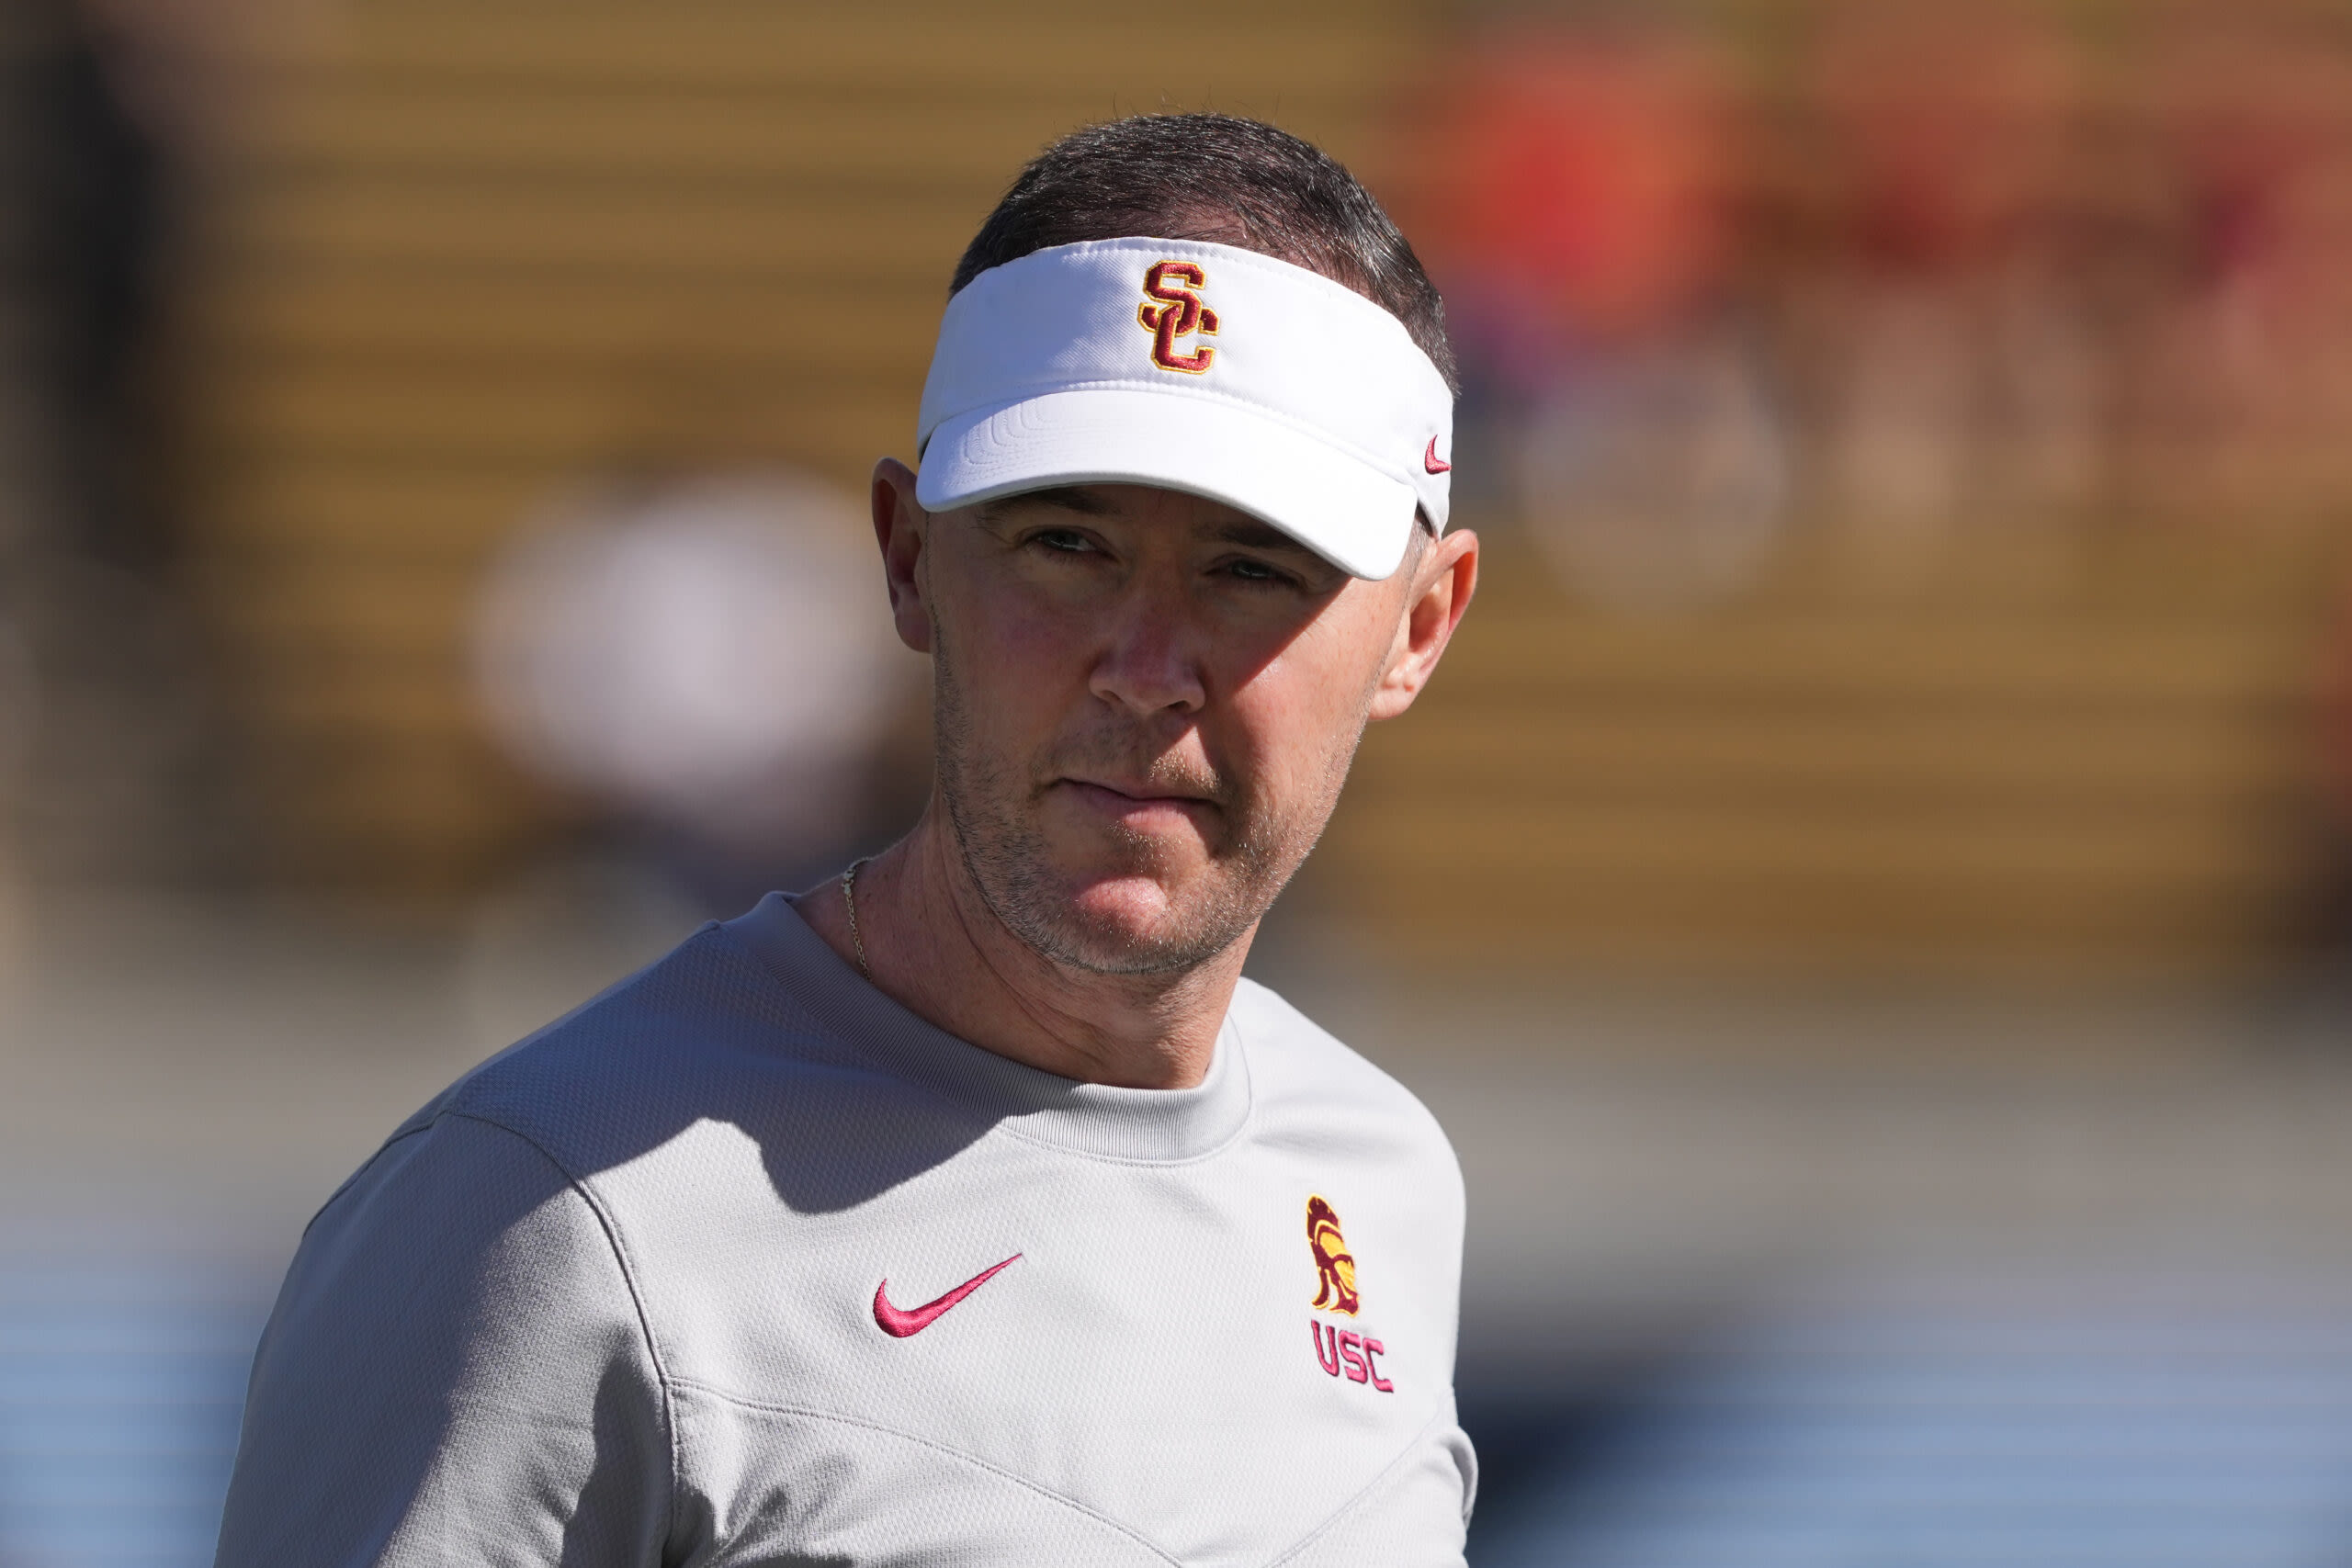 Preseason recognition means nothing to Lincoln Riley and USC